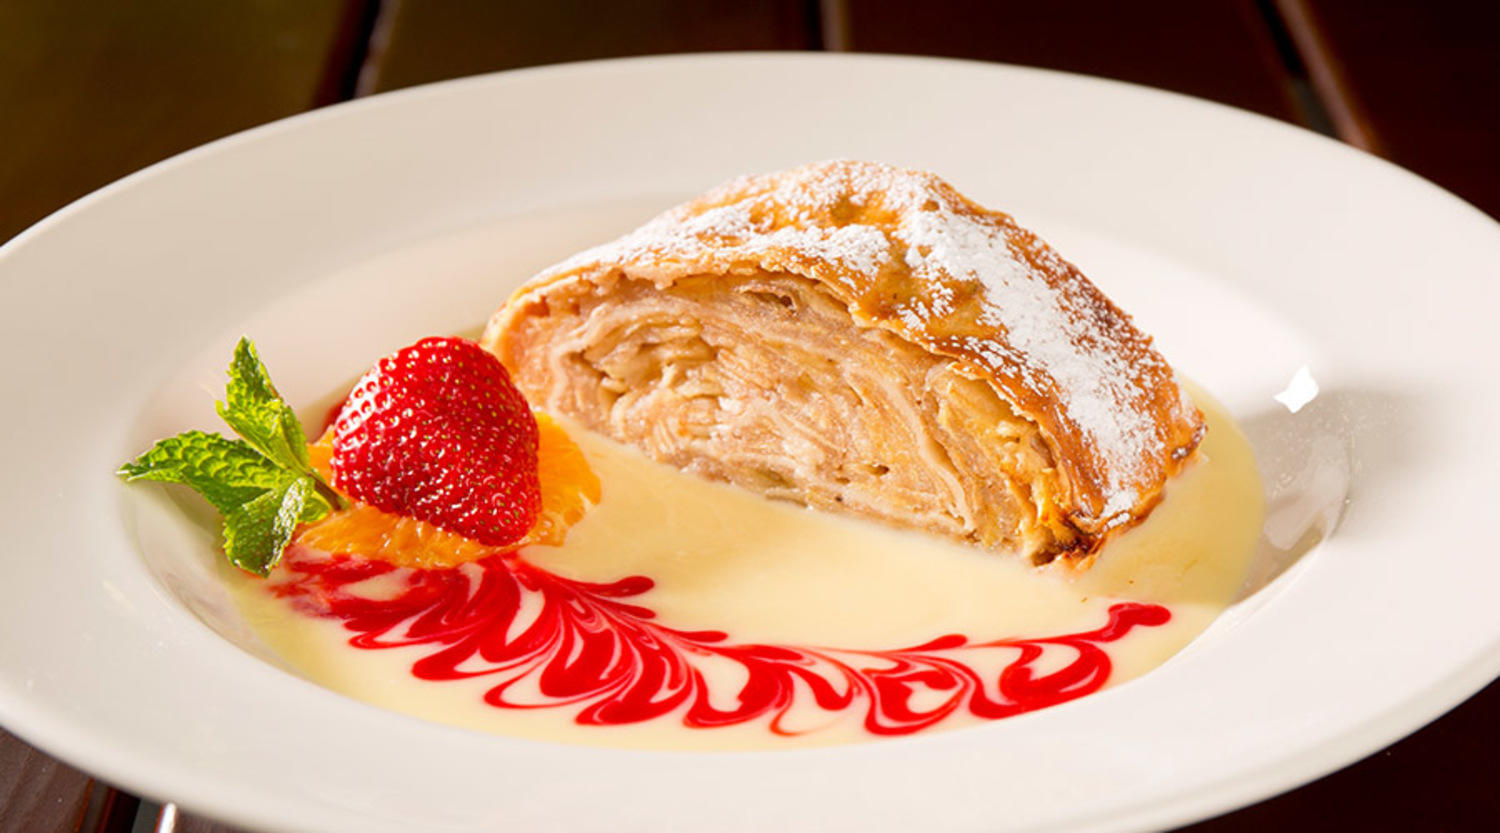 Apfelstrudel Imported Direct From Germany At Hofbrauhaus Las Vegas.0d3987a5e5ece0c6bb012b72583d3e01